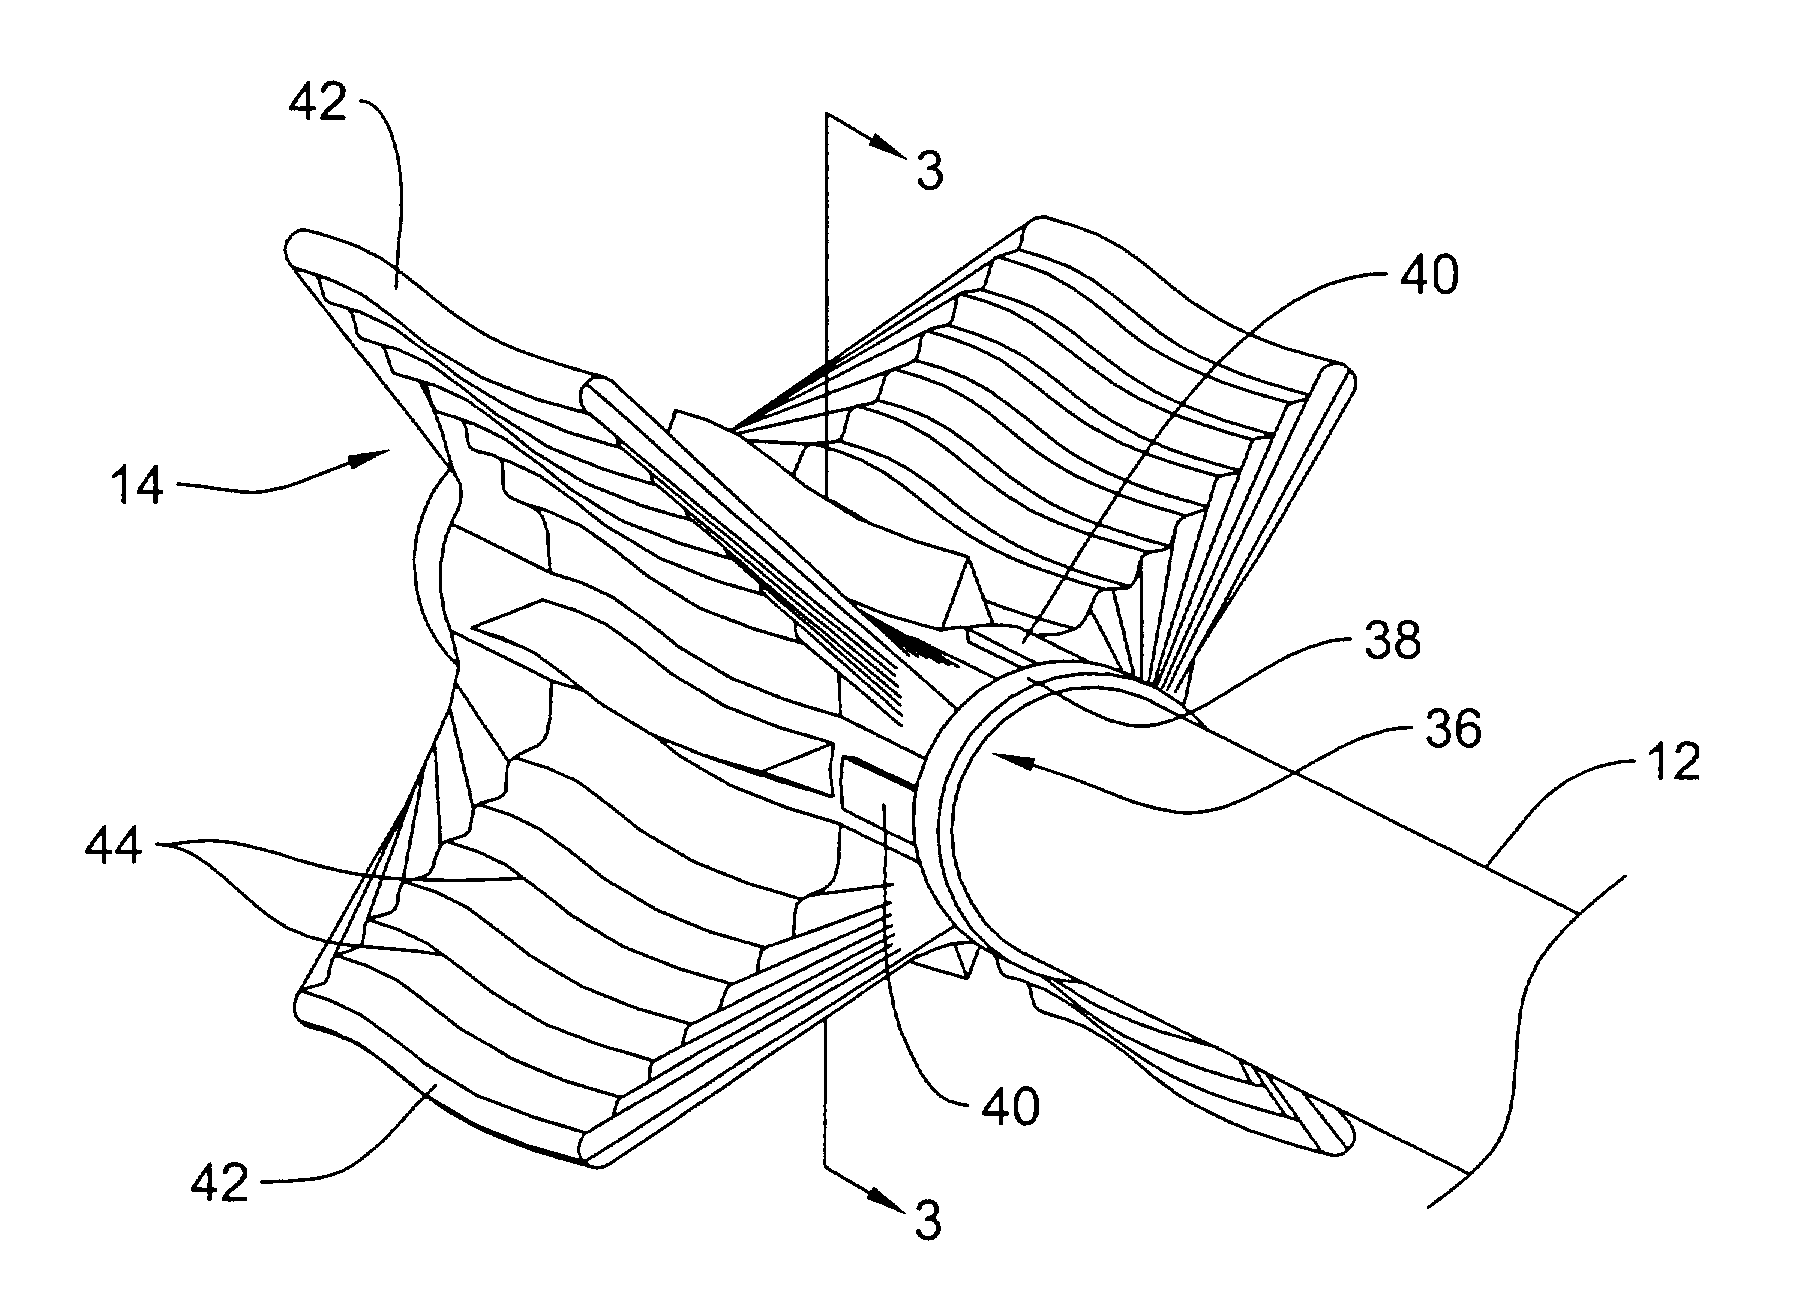 Cutting balloon catheter with improved balloon configuration